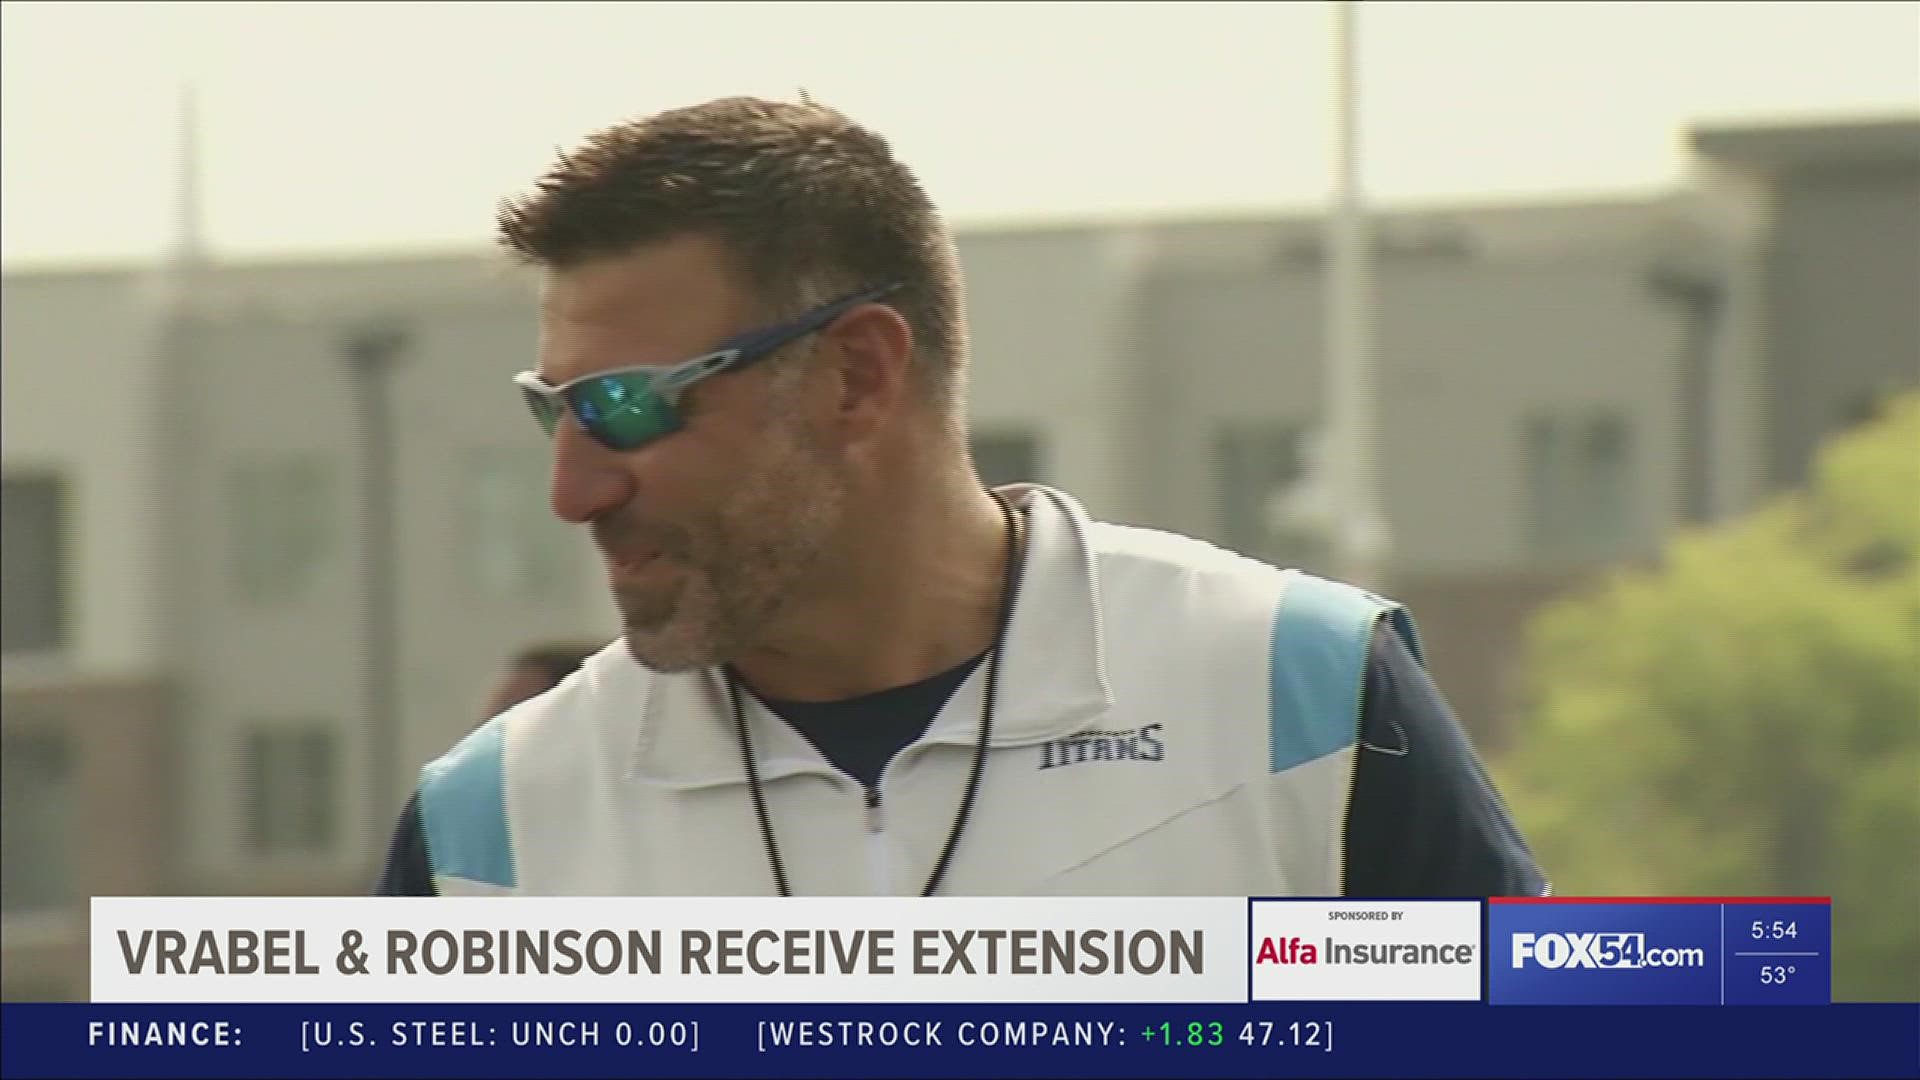 The Tennessee Titans announced Tuesday contract extensions for both Robinson and Vrabel barely two weeks after the season ended.